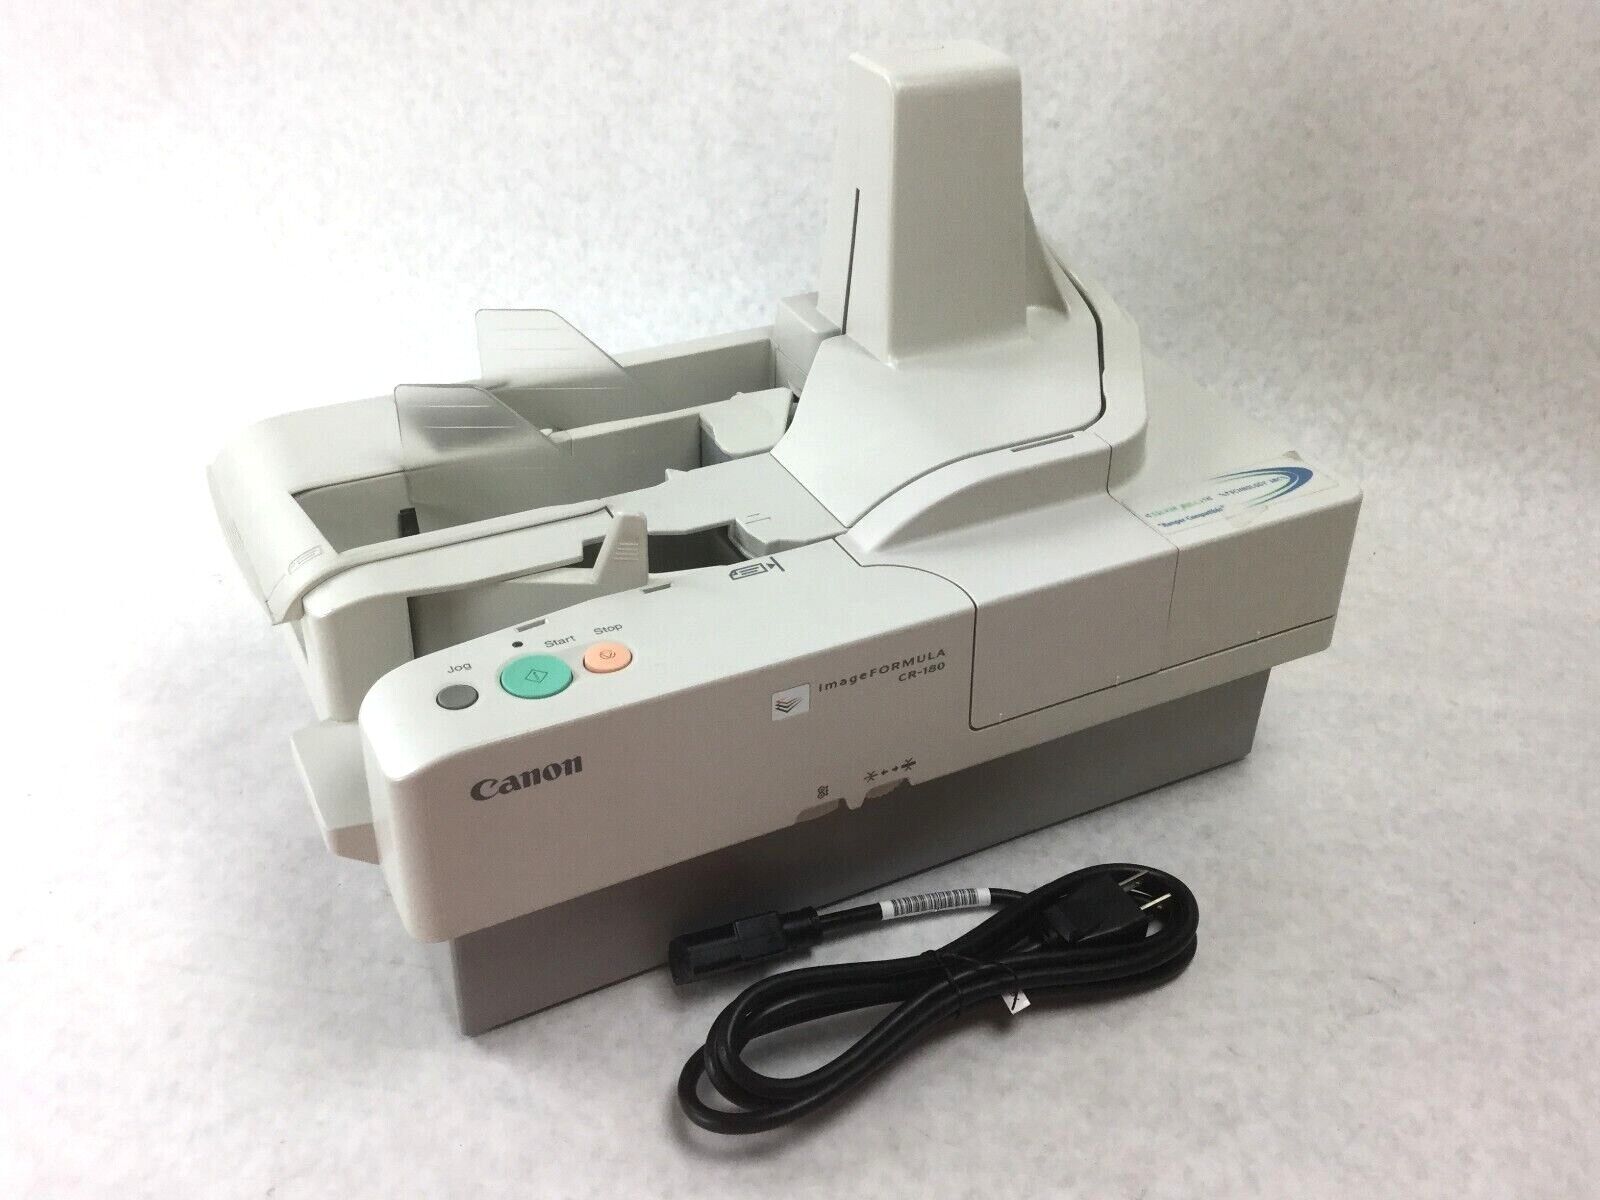 Canon CR180 Check Scanner  Includes Power Supply  Needs Ink Cartridge